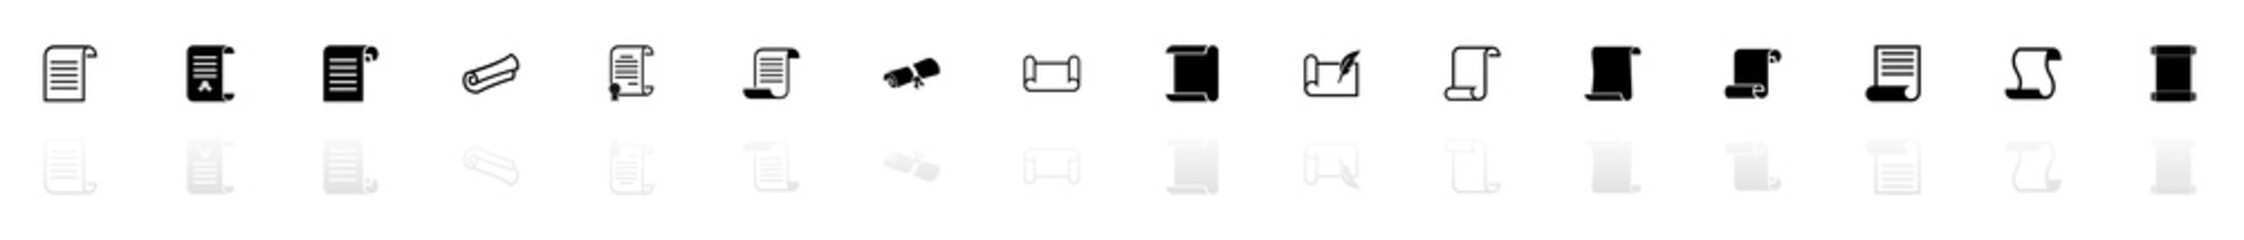 Scrolls and Papers icons - Black horizontal Illustration symbol on White Background with a mirror Shadow reflection. Flat Vector Icon.